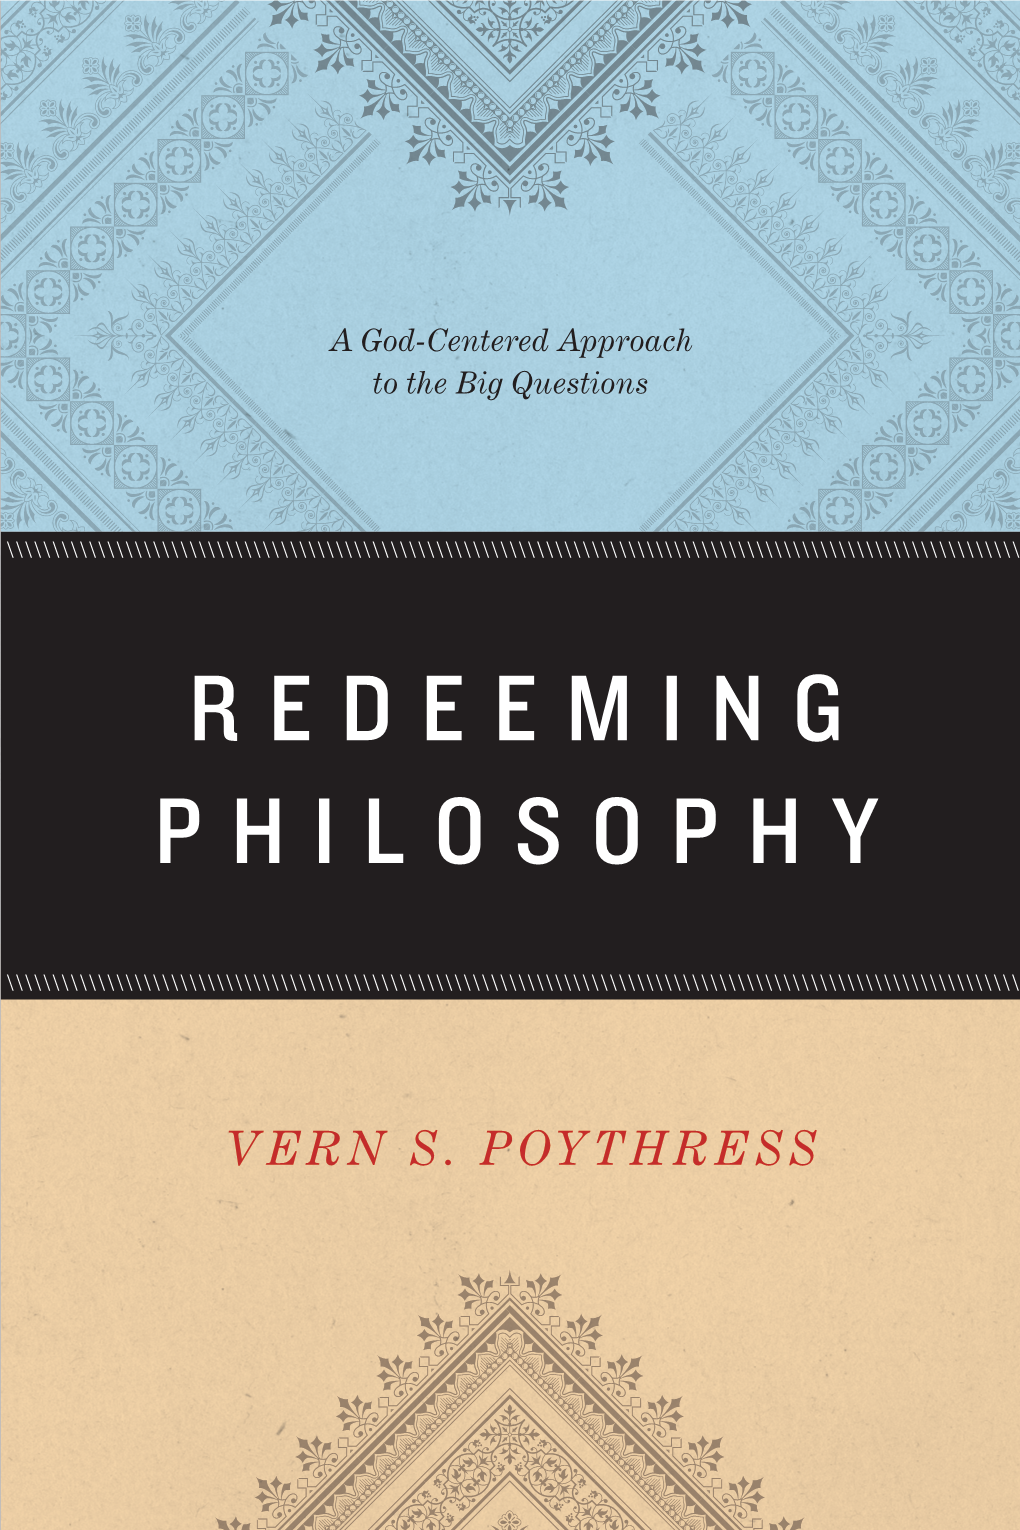 Redeeming Philosophy: a God-Centered Approach to the Big Questions Copyright © 2014 by Vern S